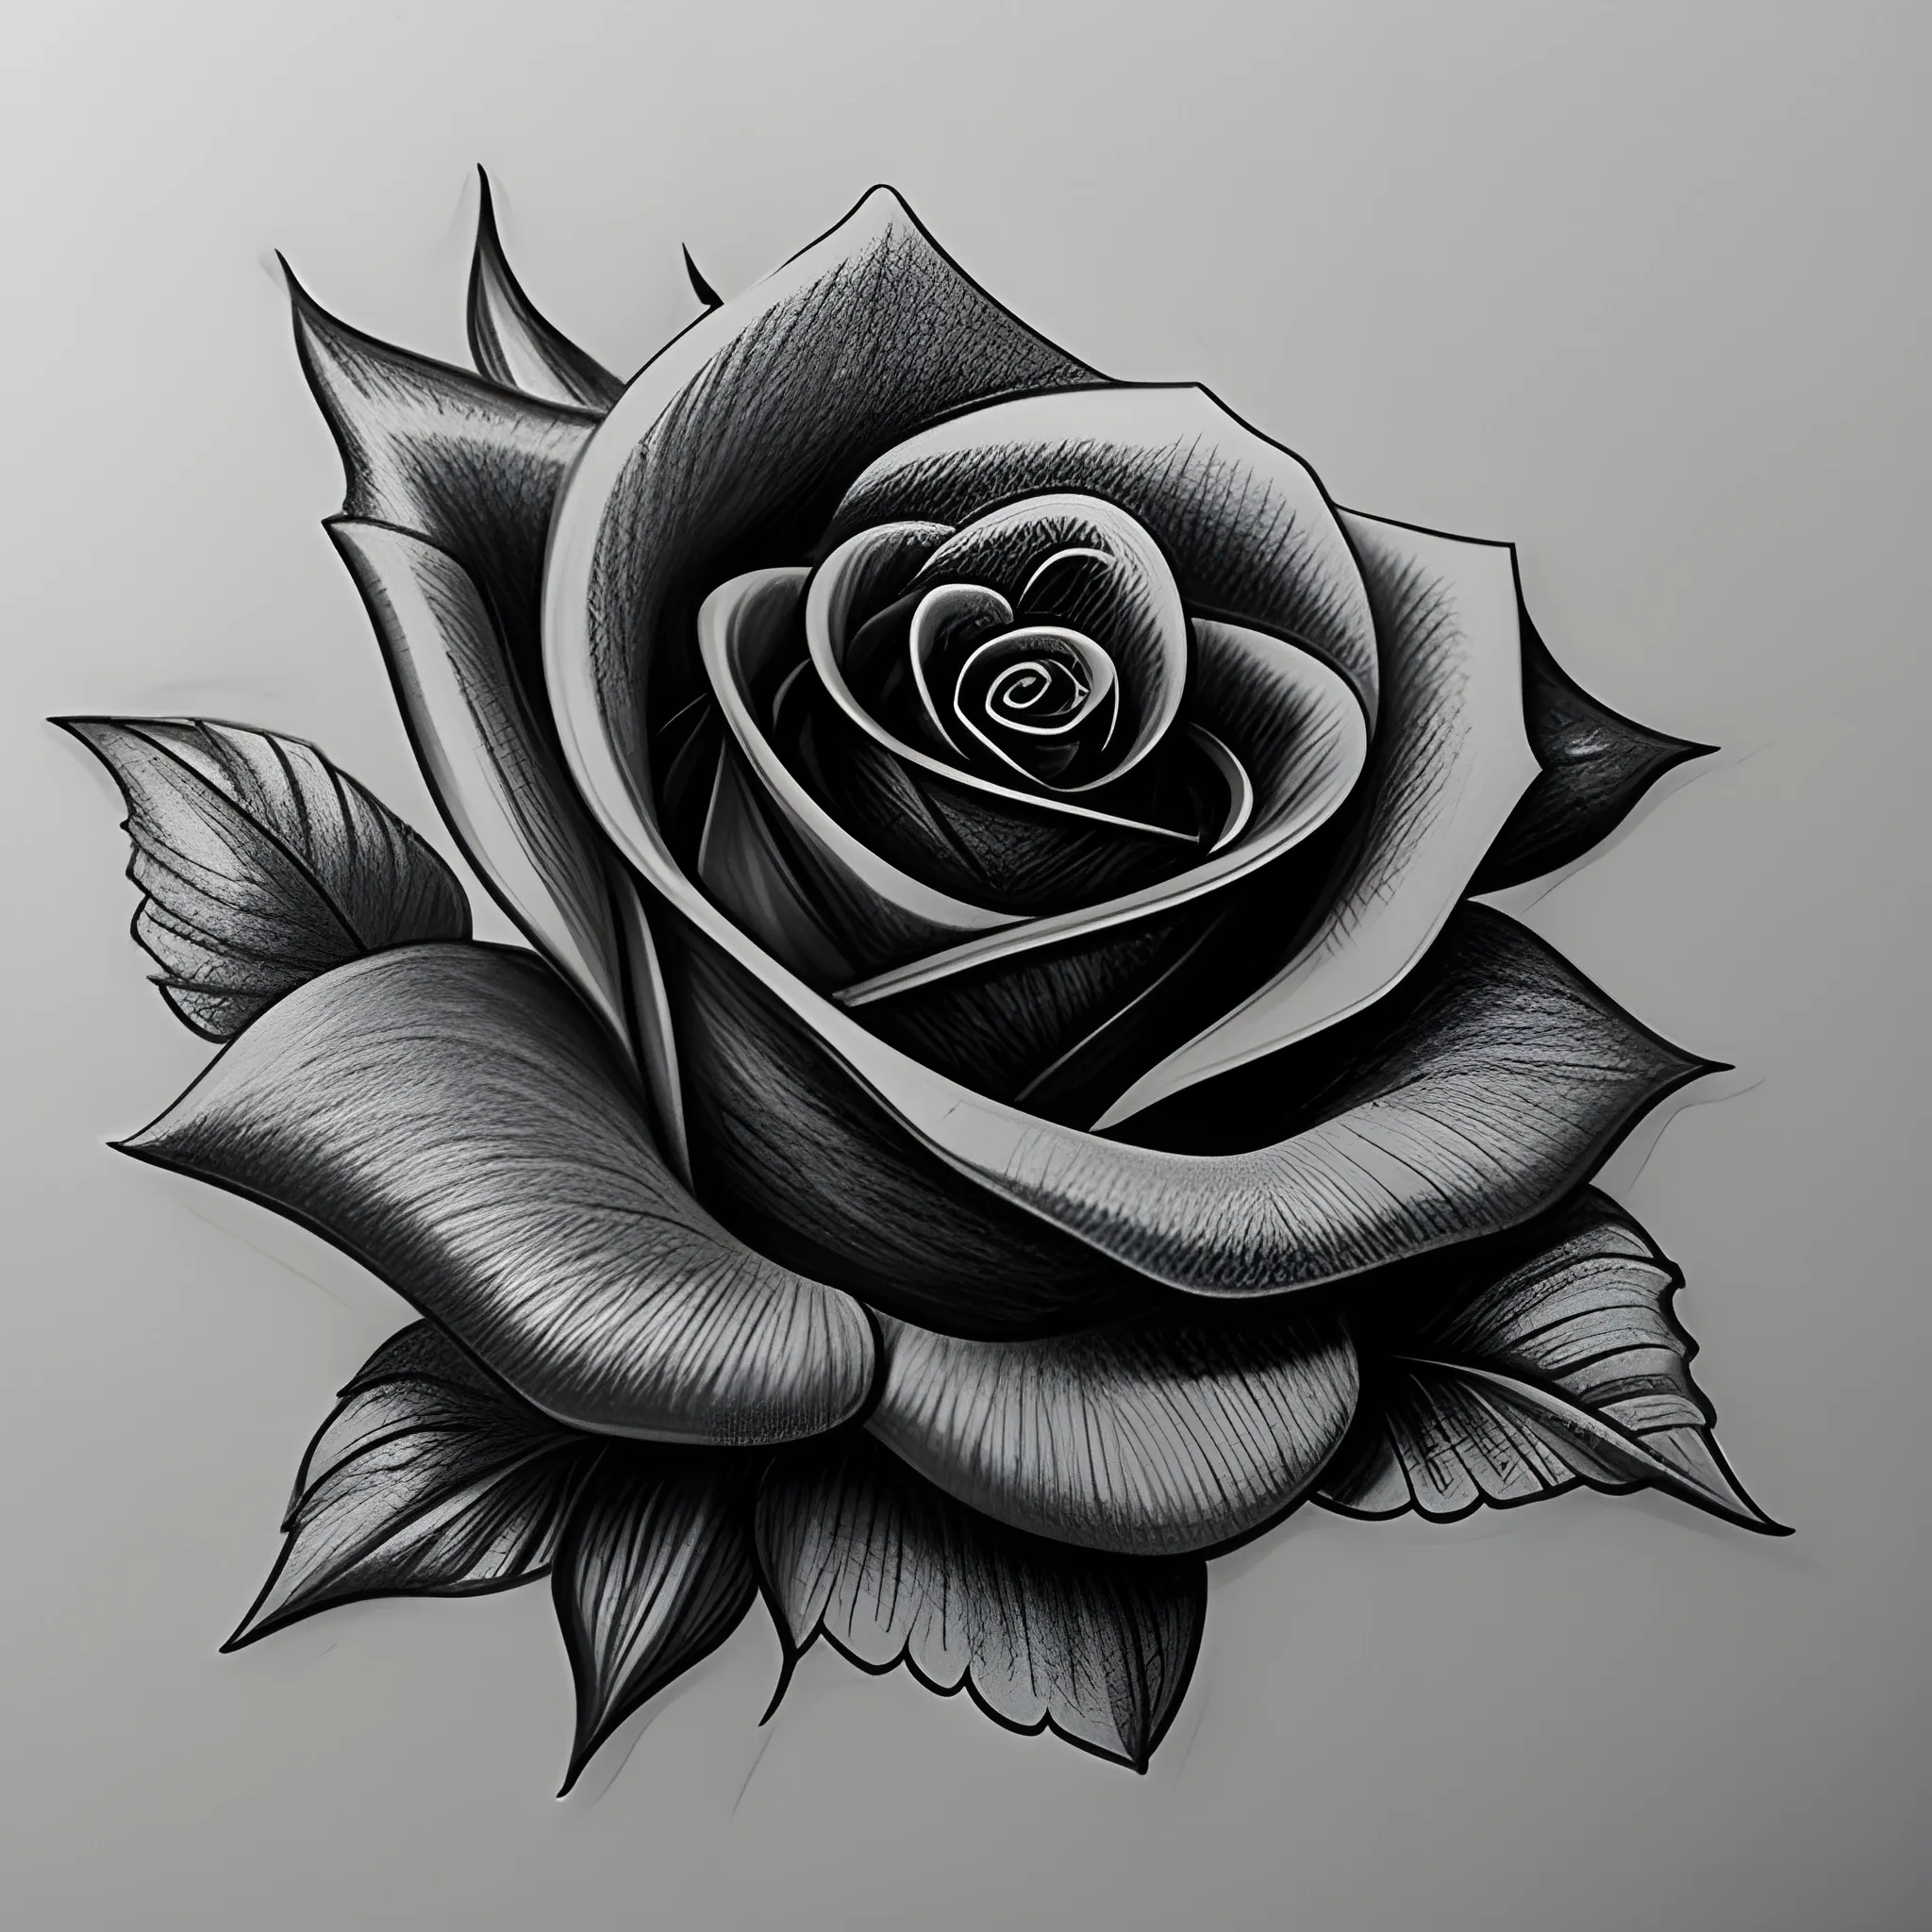 How to Draw Rose Realistic, Tattoo Flowers